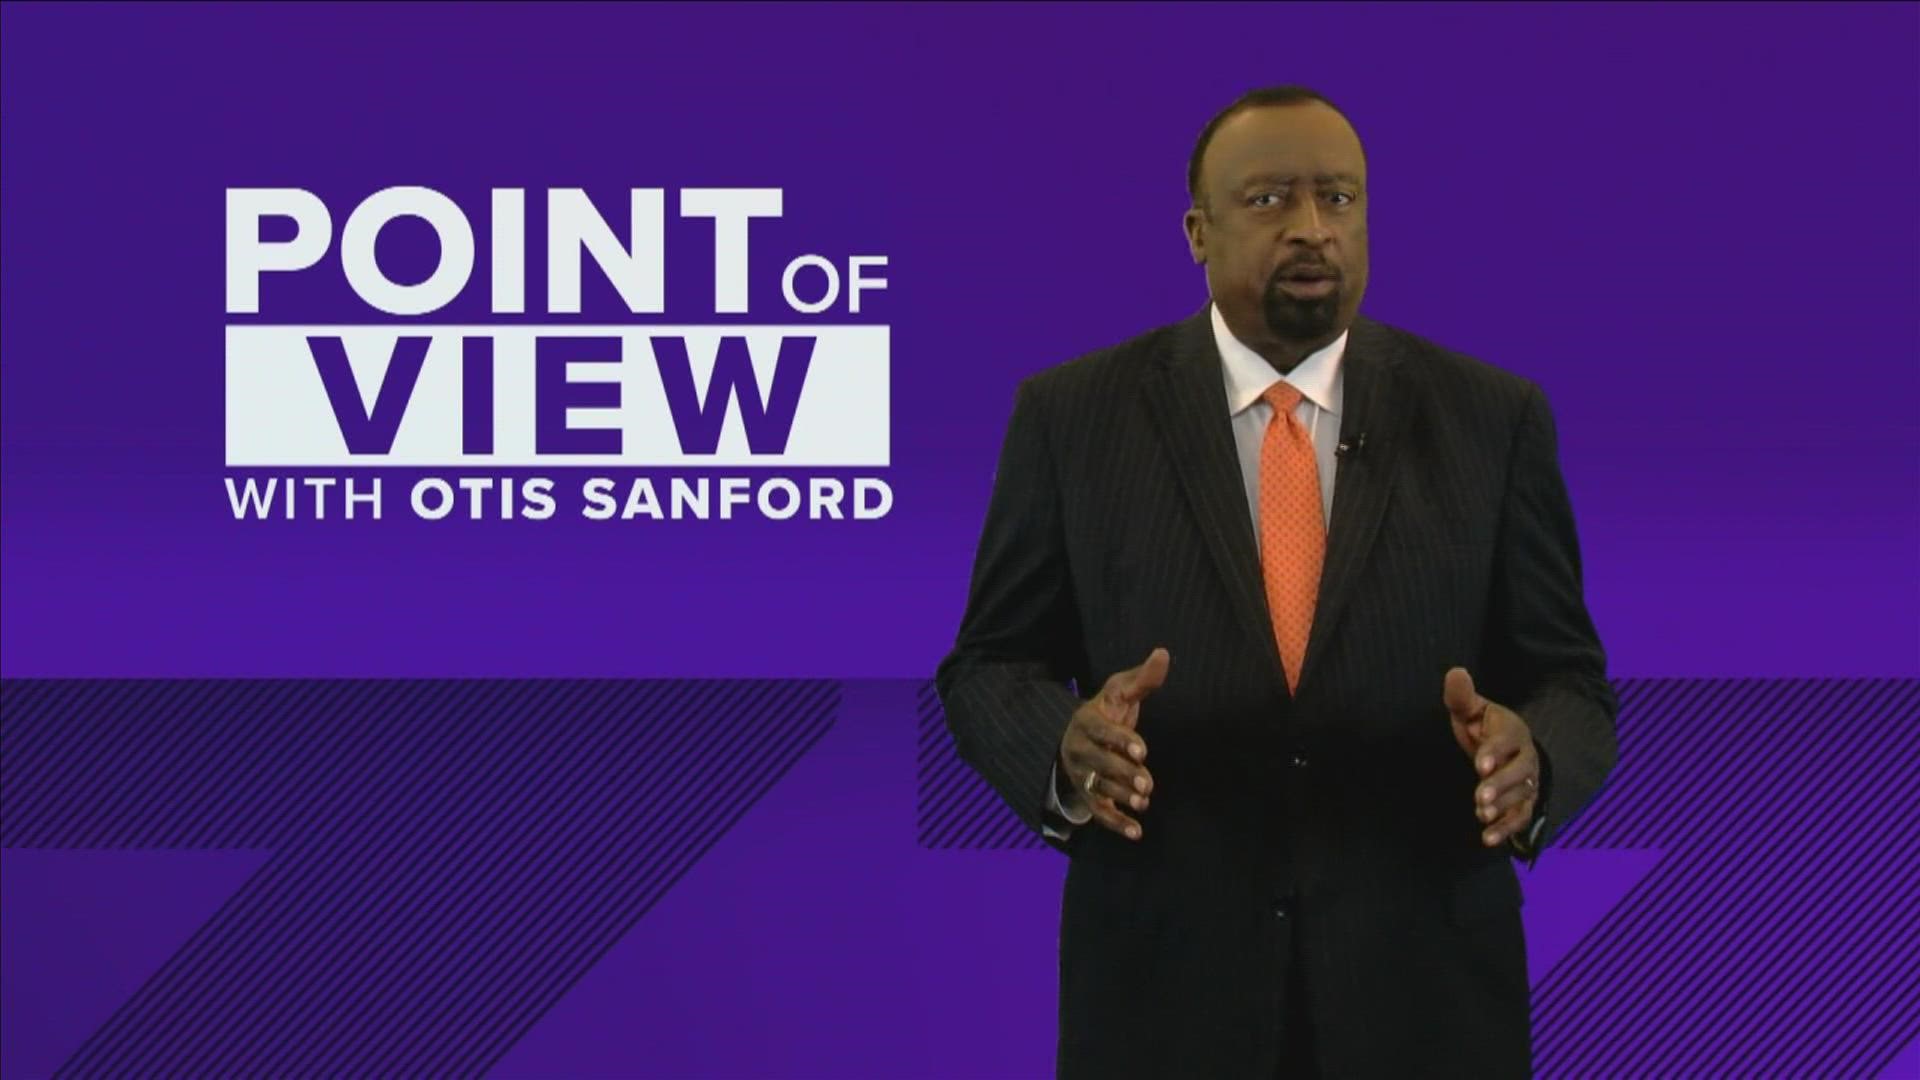 ABC24 political analyst and commentator Otis Sanford shared his point of view on a petition to strip Supreme Court Justice Amy Coney Barrett of an honor at Rhodes.